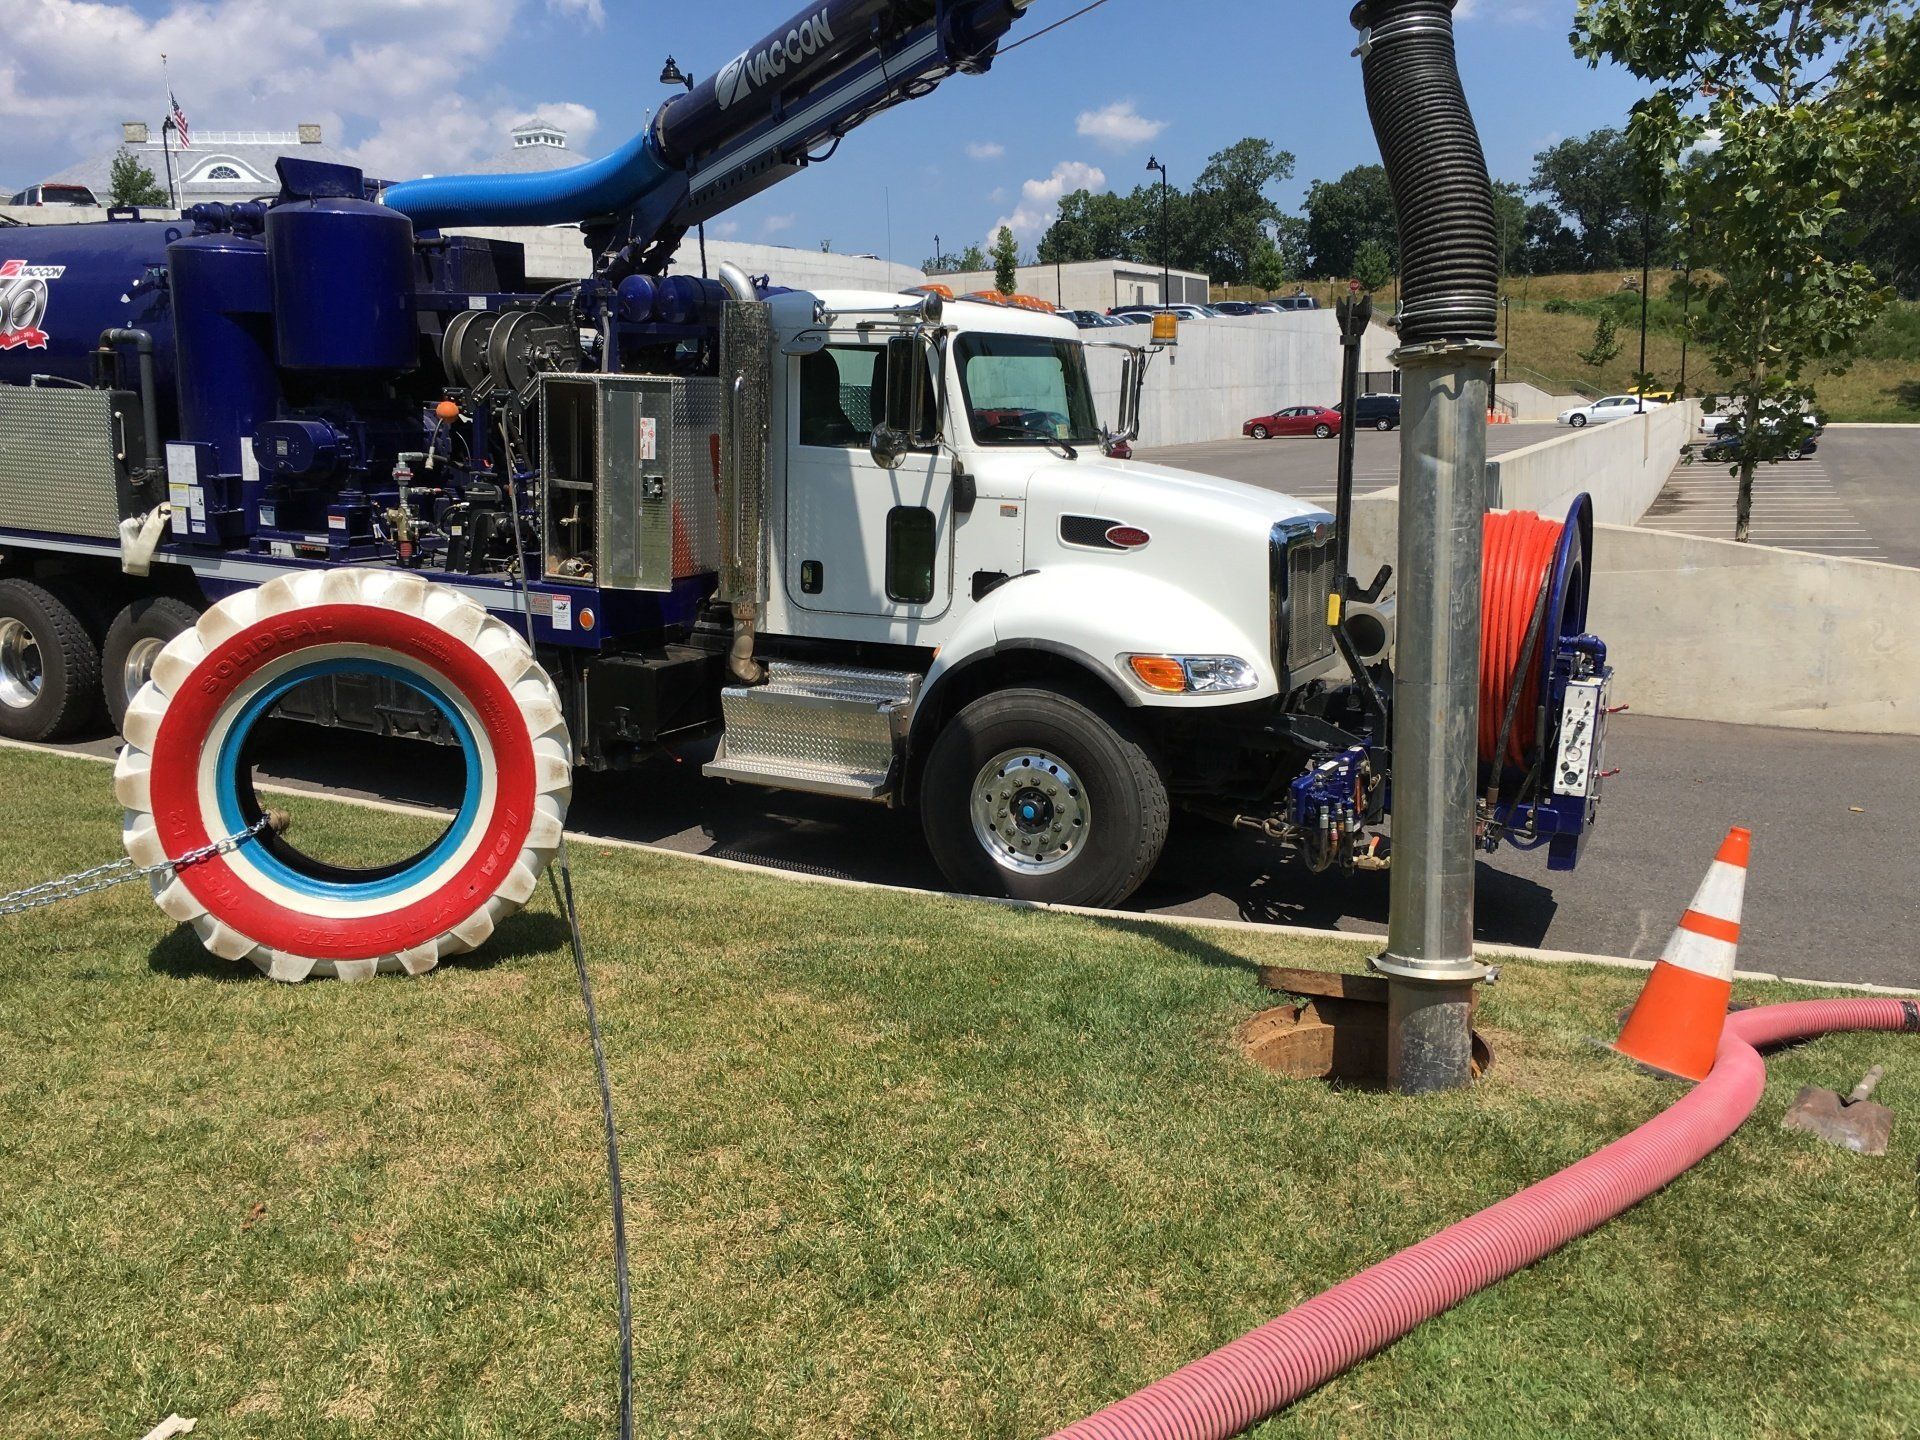 Hydrovac Companies Near Me — Concrete Septic Tank At Construction Site in Sterling, VA